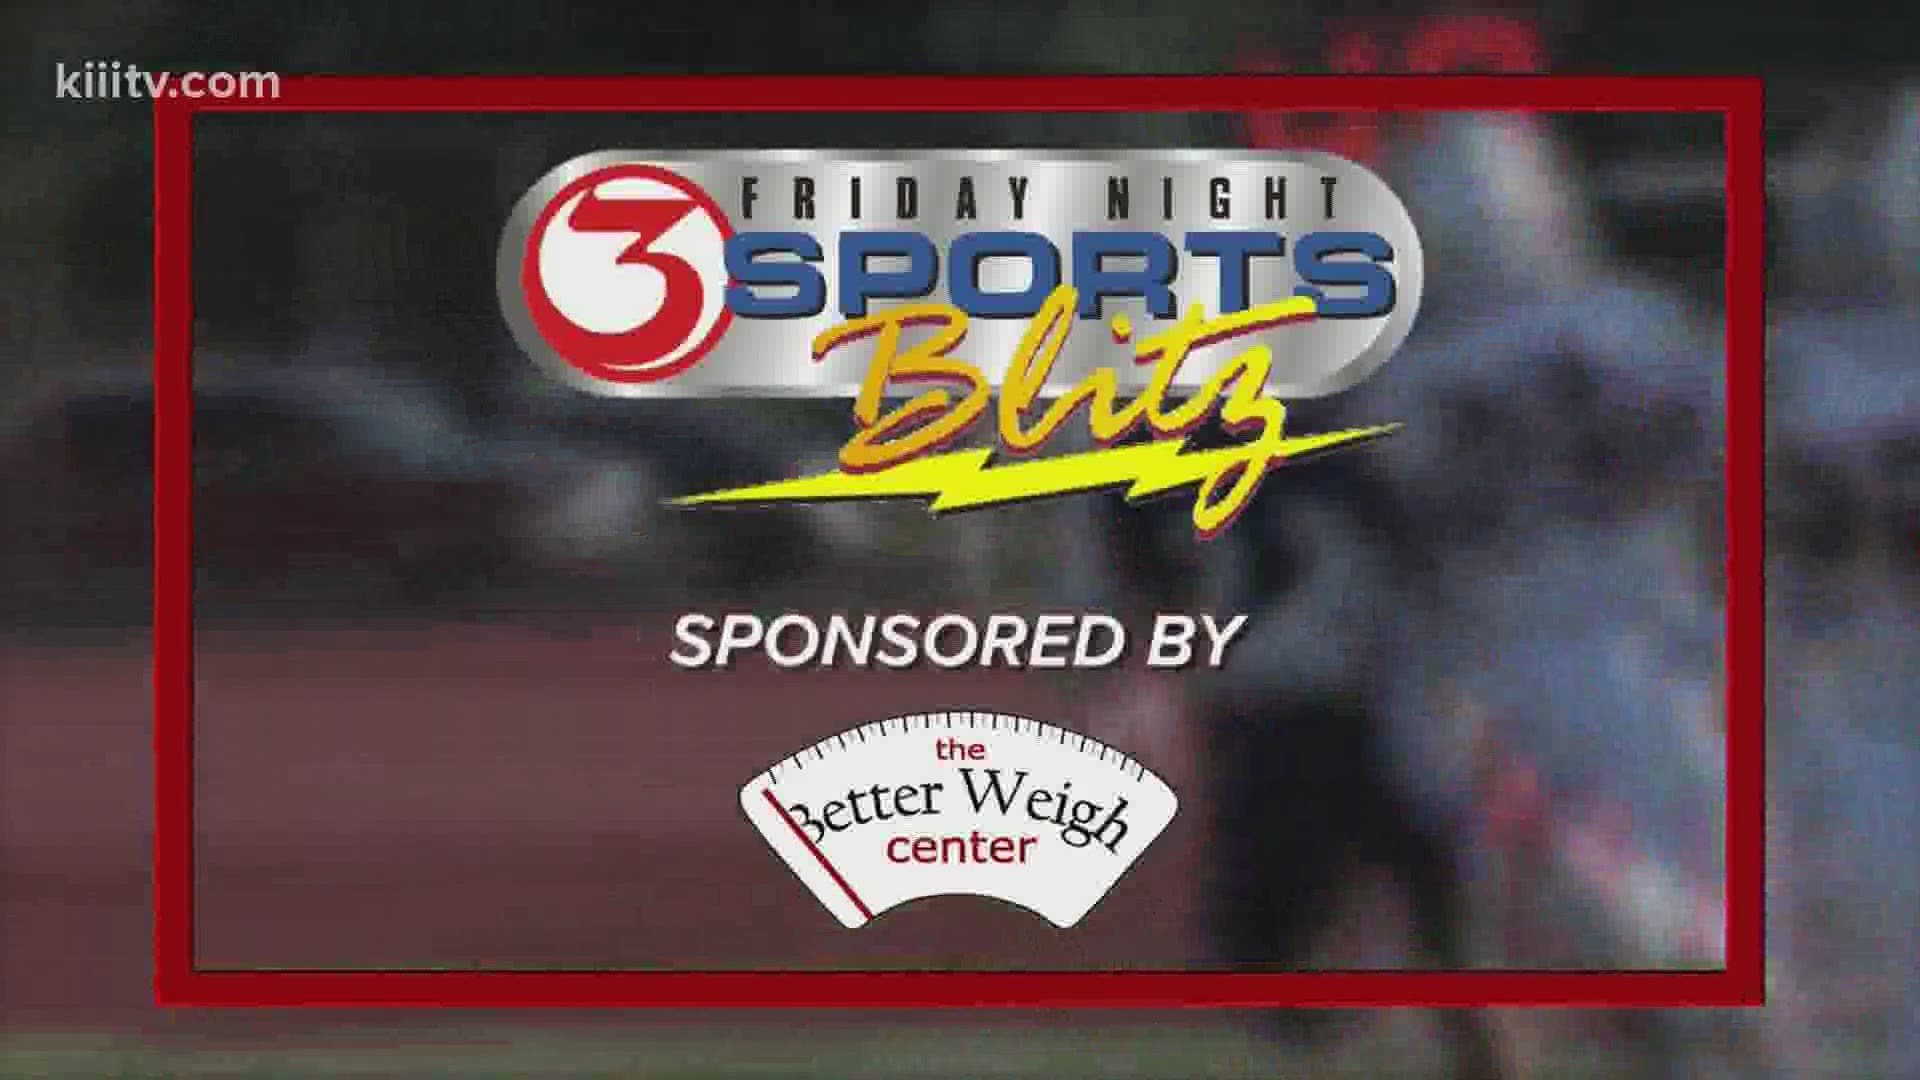 Week 3 of the Friday Night Sports Blitz. Watch high school football highlights from across the Coastal Bend.